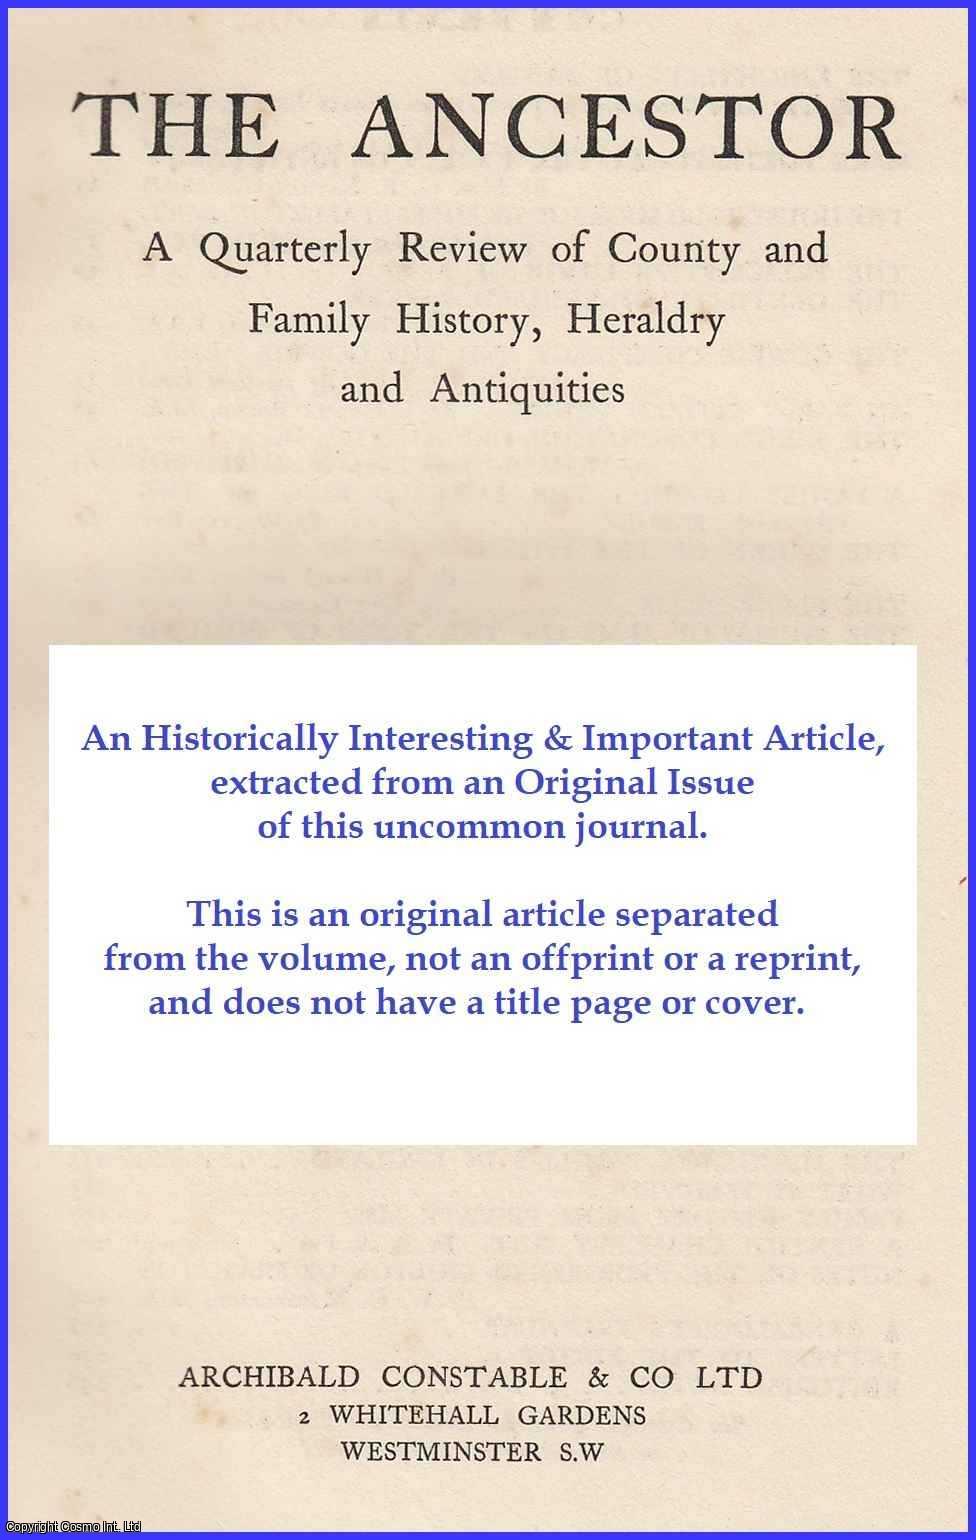 G.H. - Ten English Wills, 1400-1415. An original article from The Ancestor, a Quarterly Review of County & Family History, Heraldry and Antiquities, 1903.